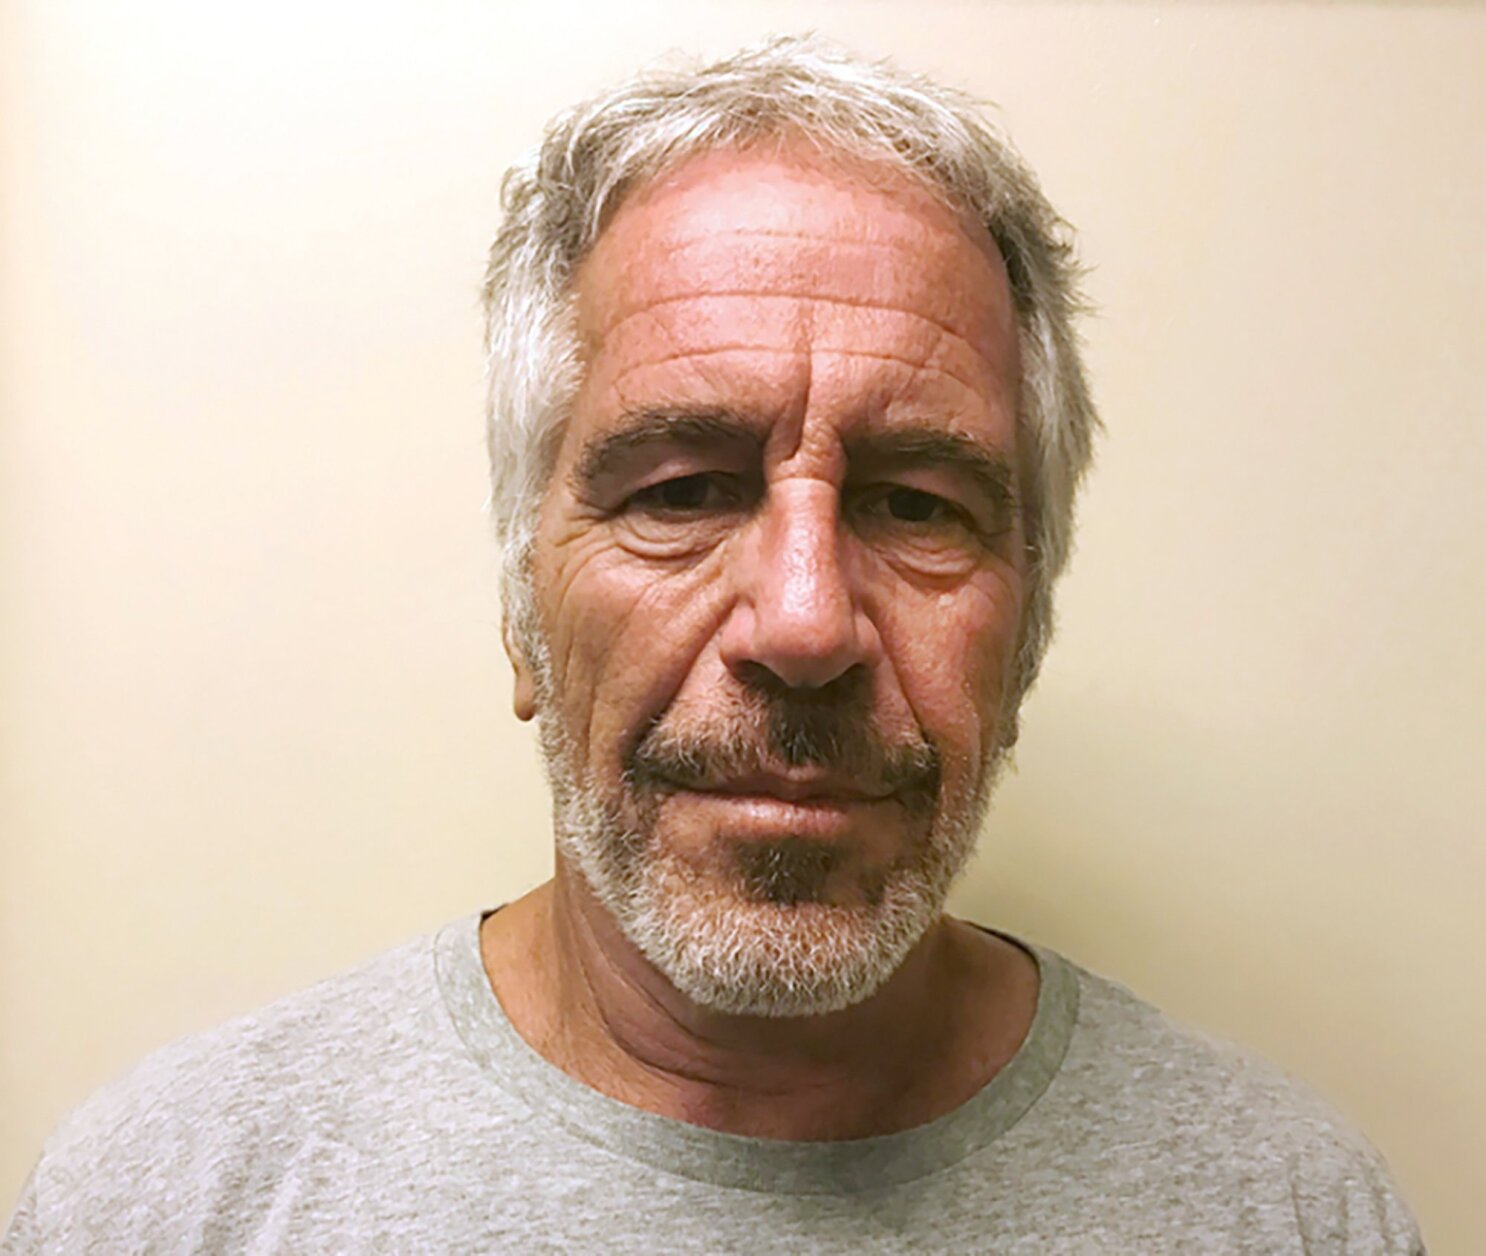 A 2017 photo of Epstein provided by the New York State Sex Offender Registry.